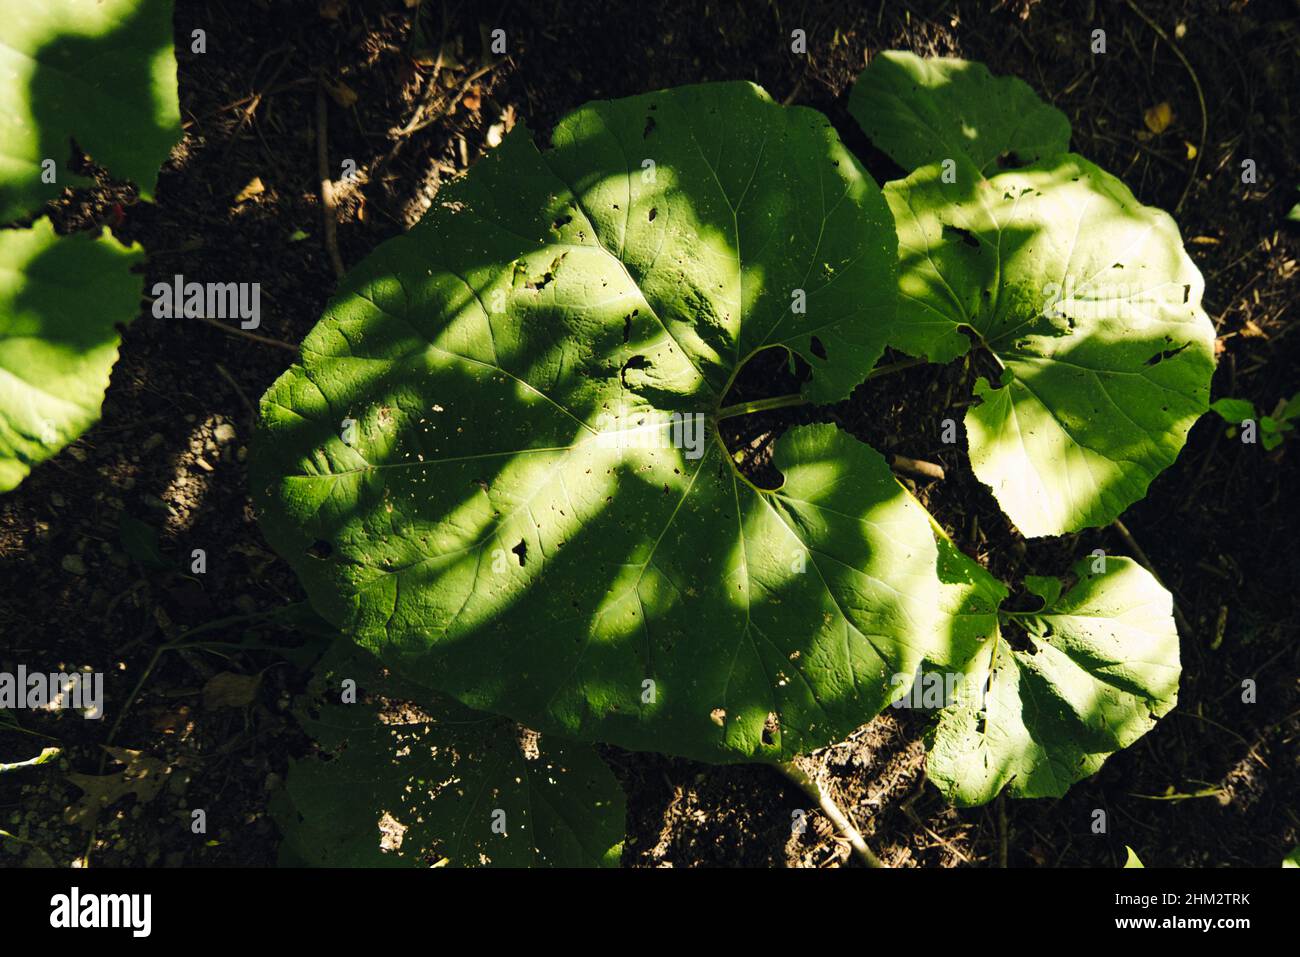 Top view selective focus shot of large green leaves growing in the garden on a sunny day Stock Photo